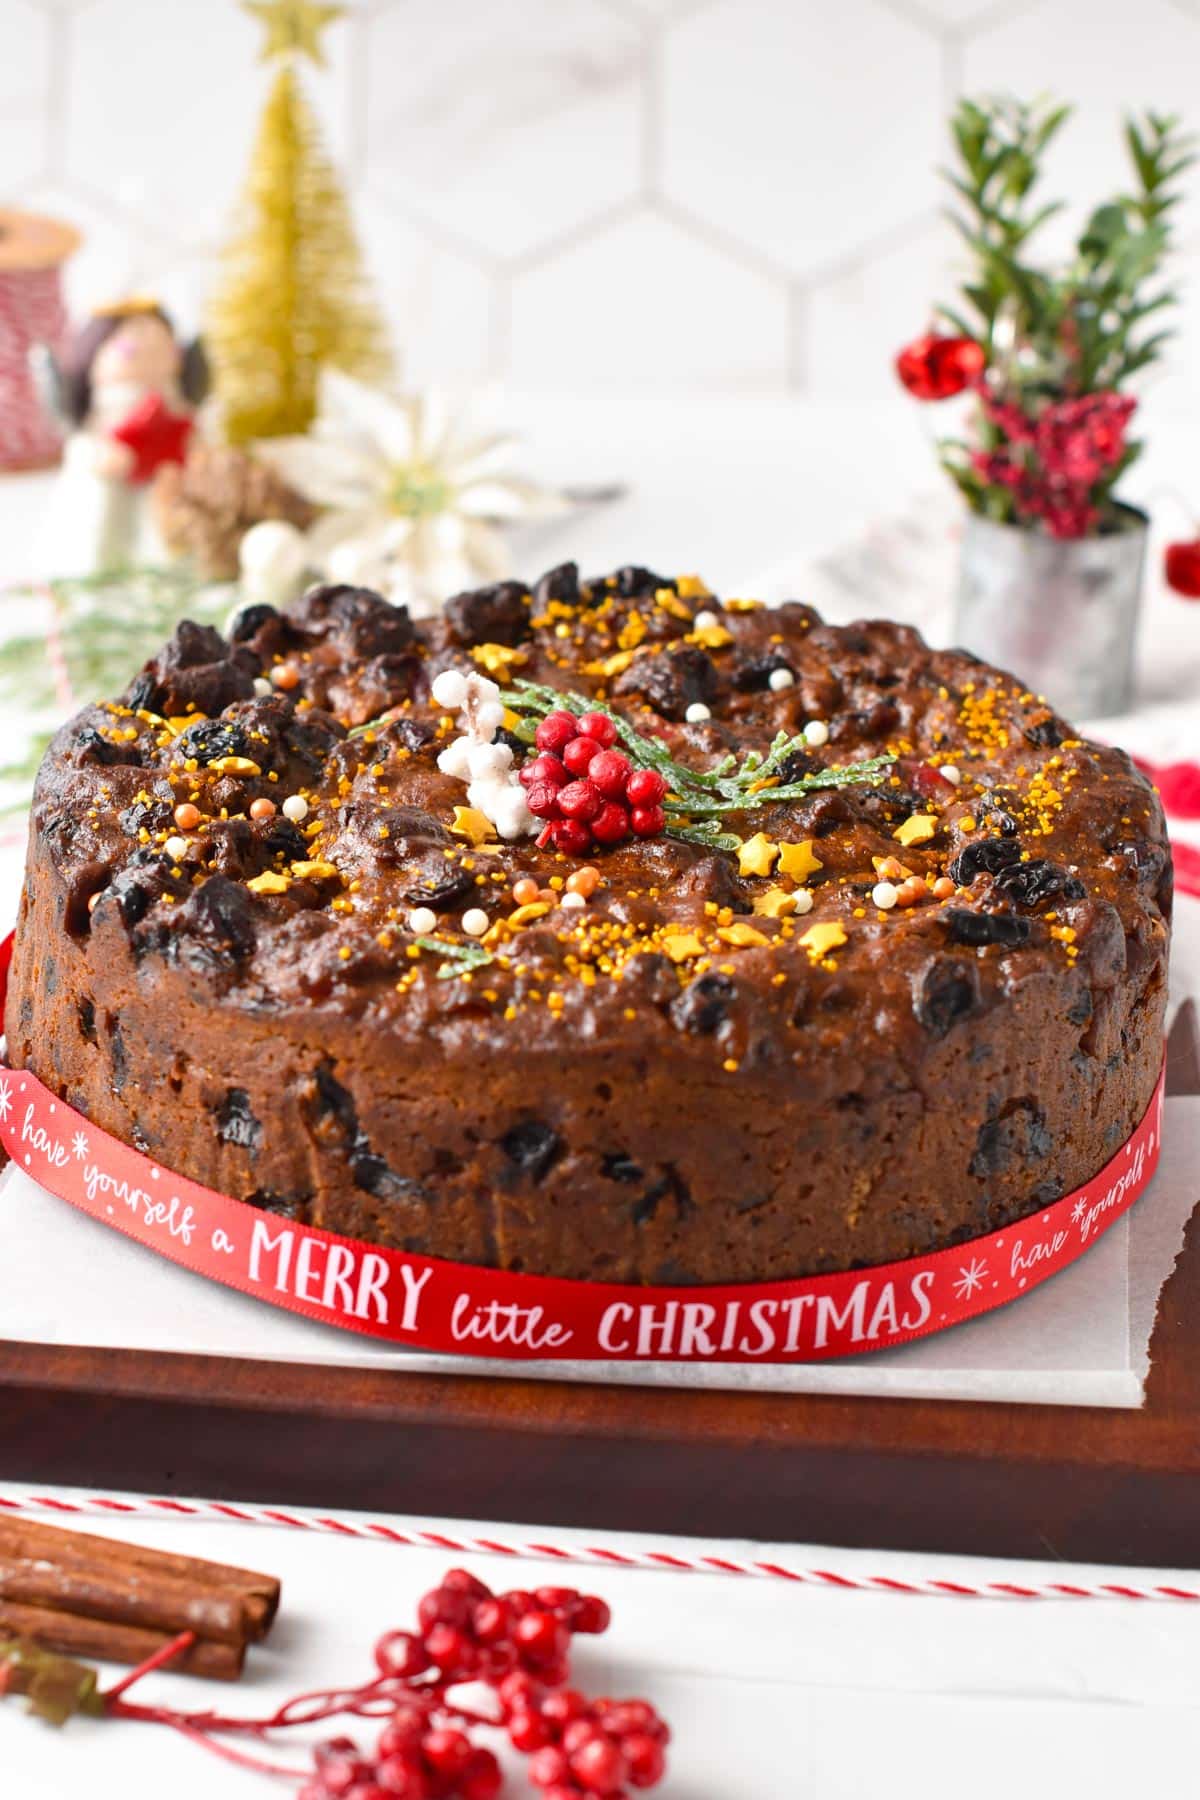 A Vegan Christmas Cake decorated with vegan golden sprinkles and Christmas ribbon